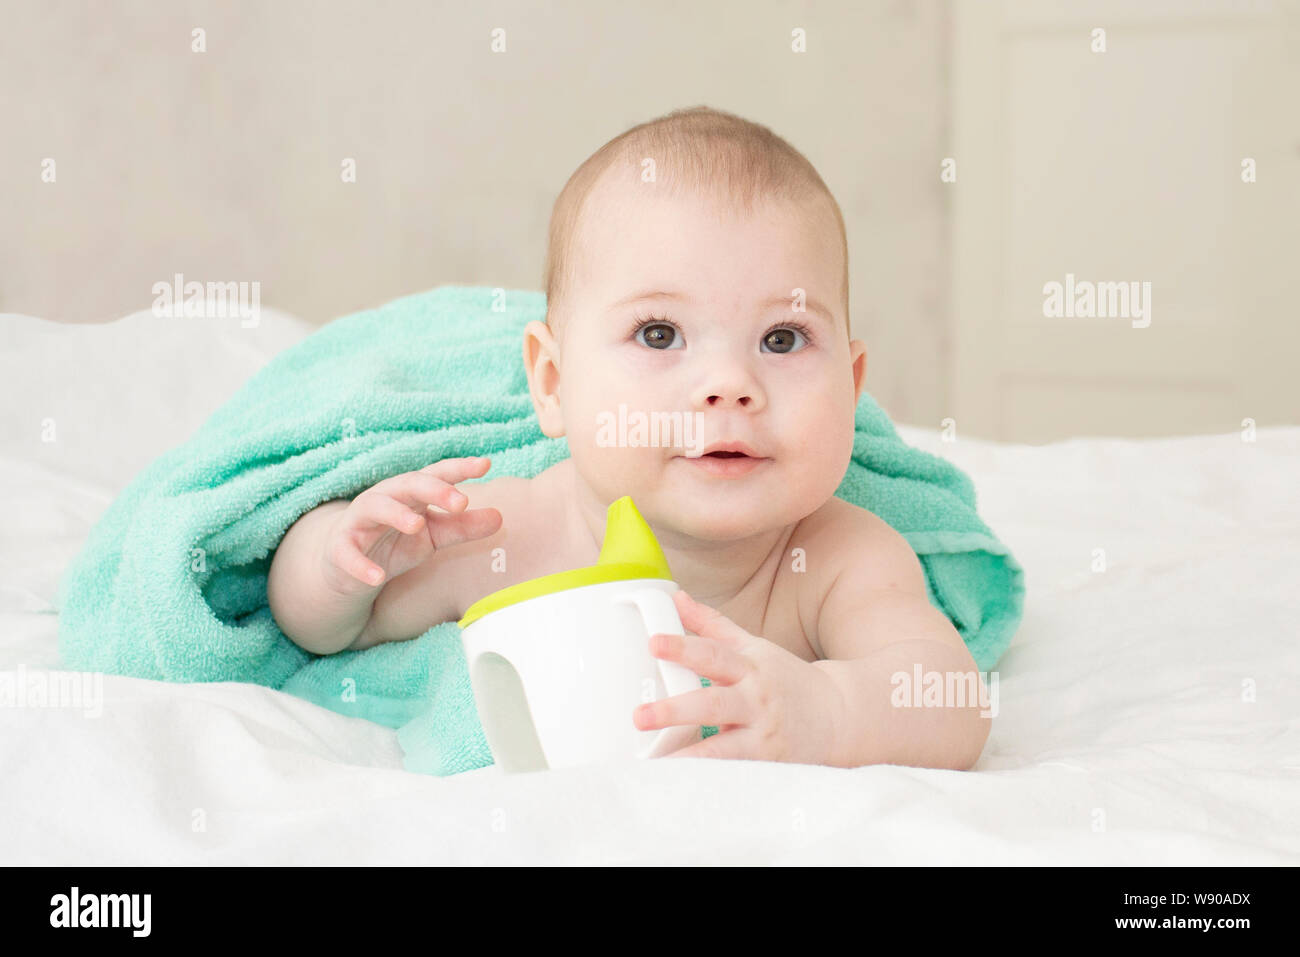 https://c8.alamy.com/comp/W90ADX/baby-girl-boy-wrapped-in-a-towel-holding-a-non-spill-cup-cute-cheerful-caucasian-baby-with-brown-eyes-portrait-soft-focus-W90ADX.jpg